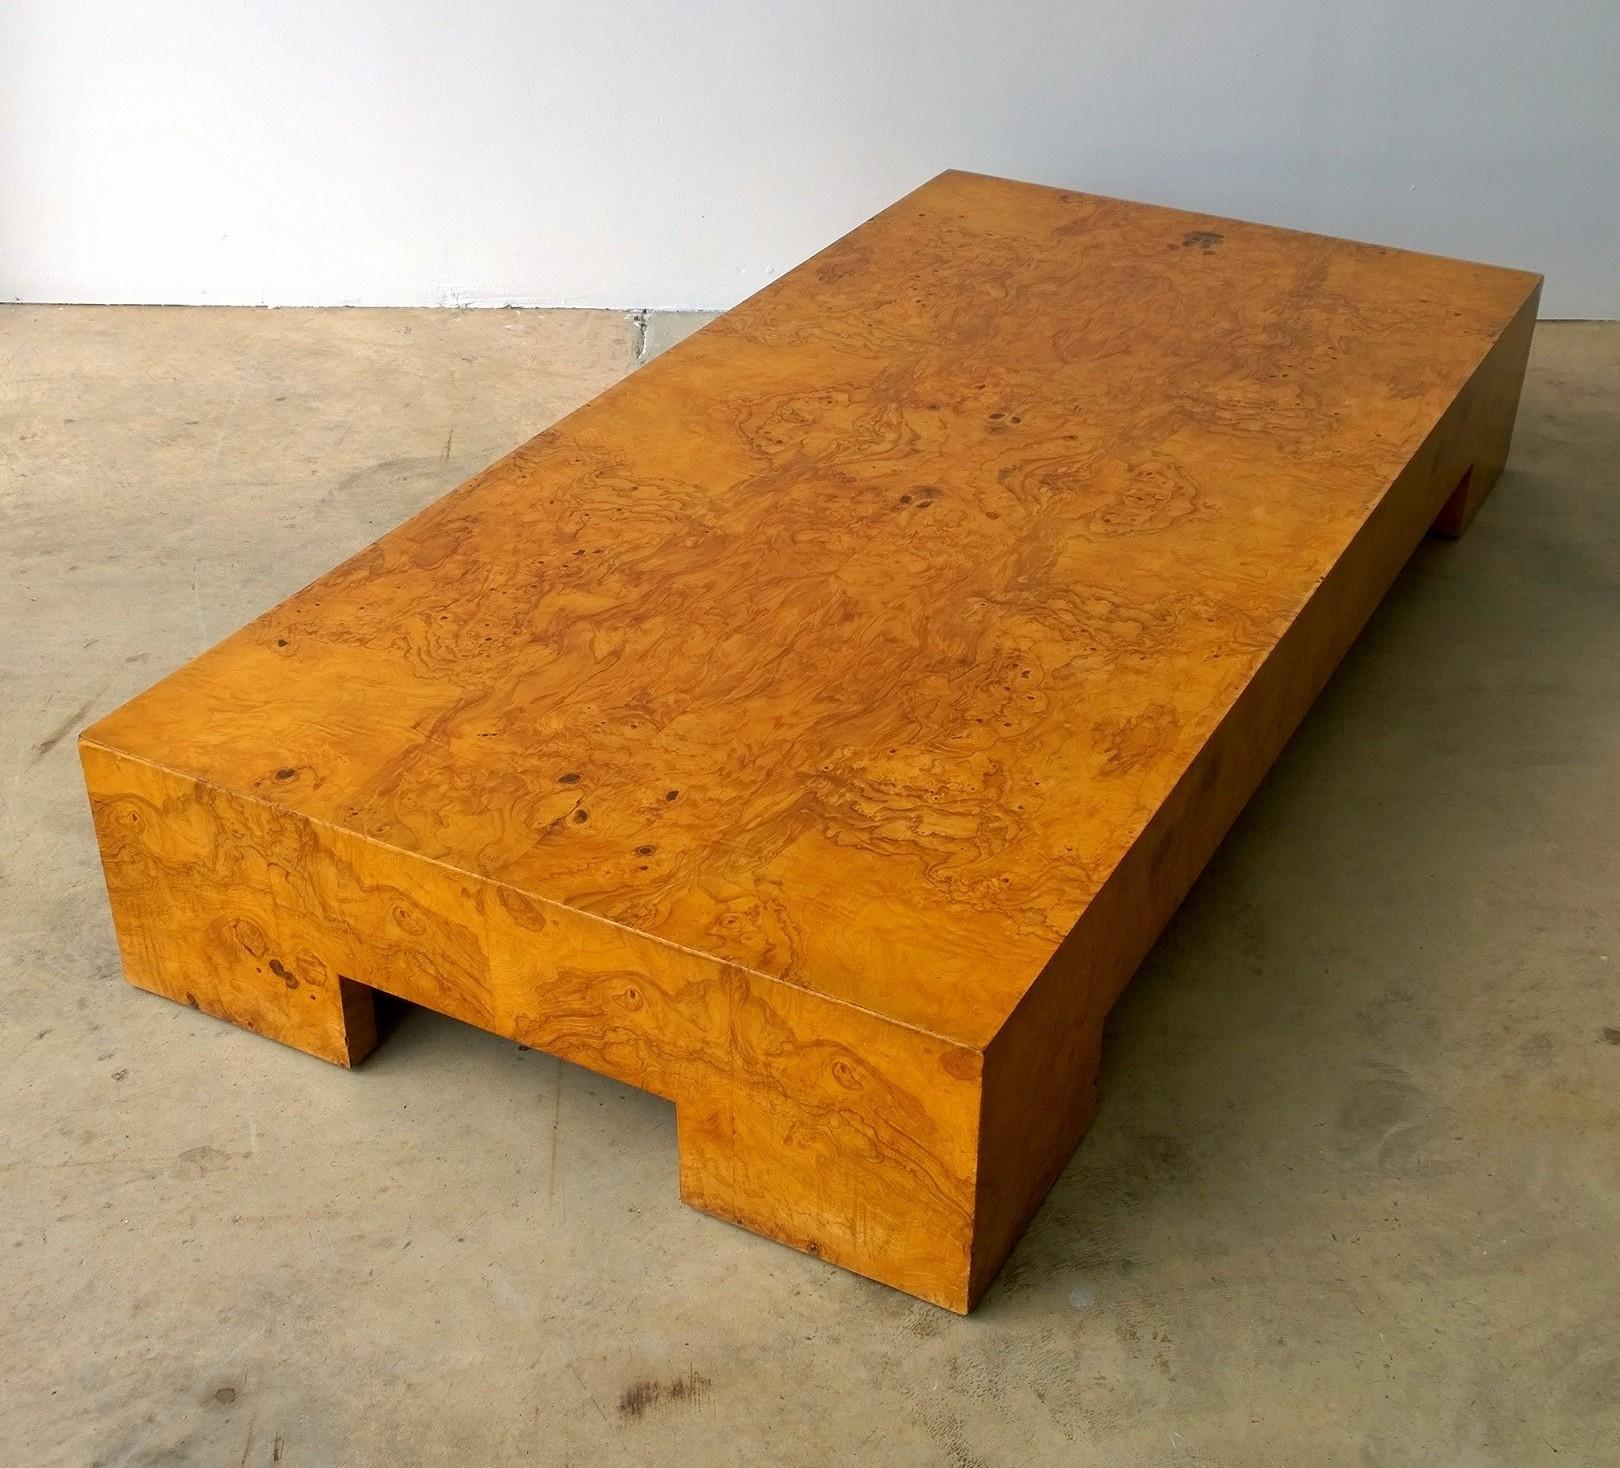 Offered is a Mid-Century Modern Italian Milo Baughman style burl wood veneer coffee / cocktail / low table. This piece is Minimalist in its lines yet quite elegant with the use of the burl wood. This low table was usually produced as a large square